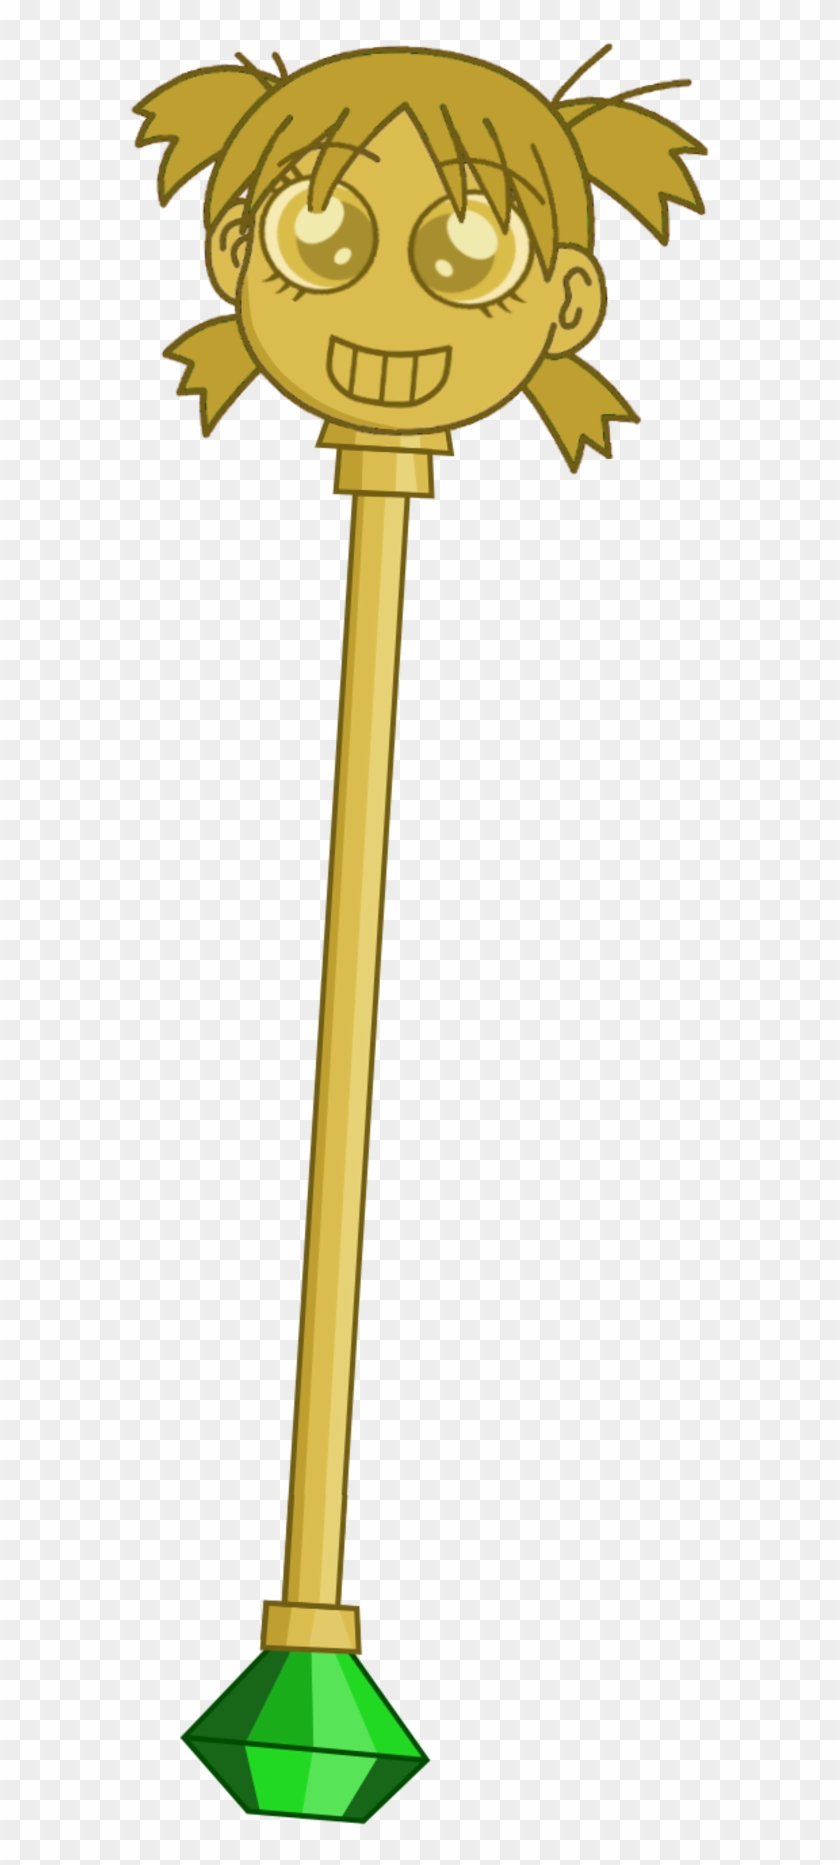 The Twilight Sparkle Scepter - Wood Clipart #3734417